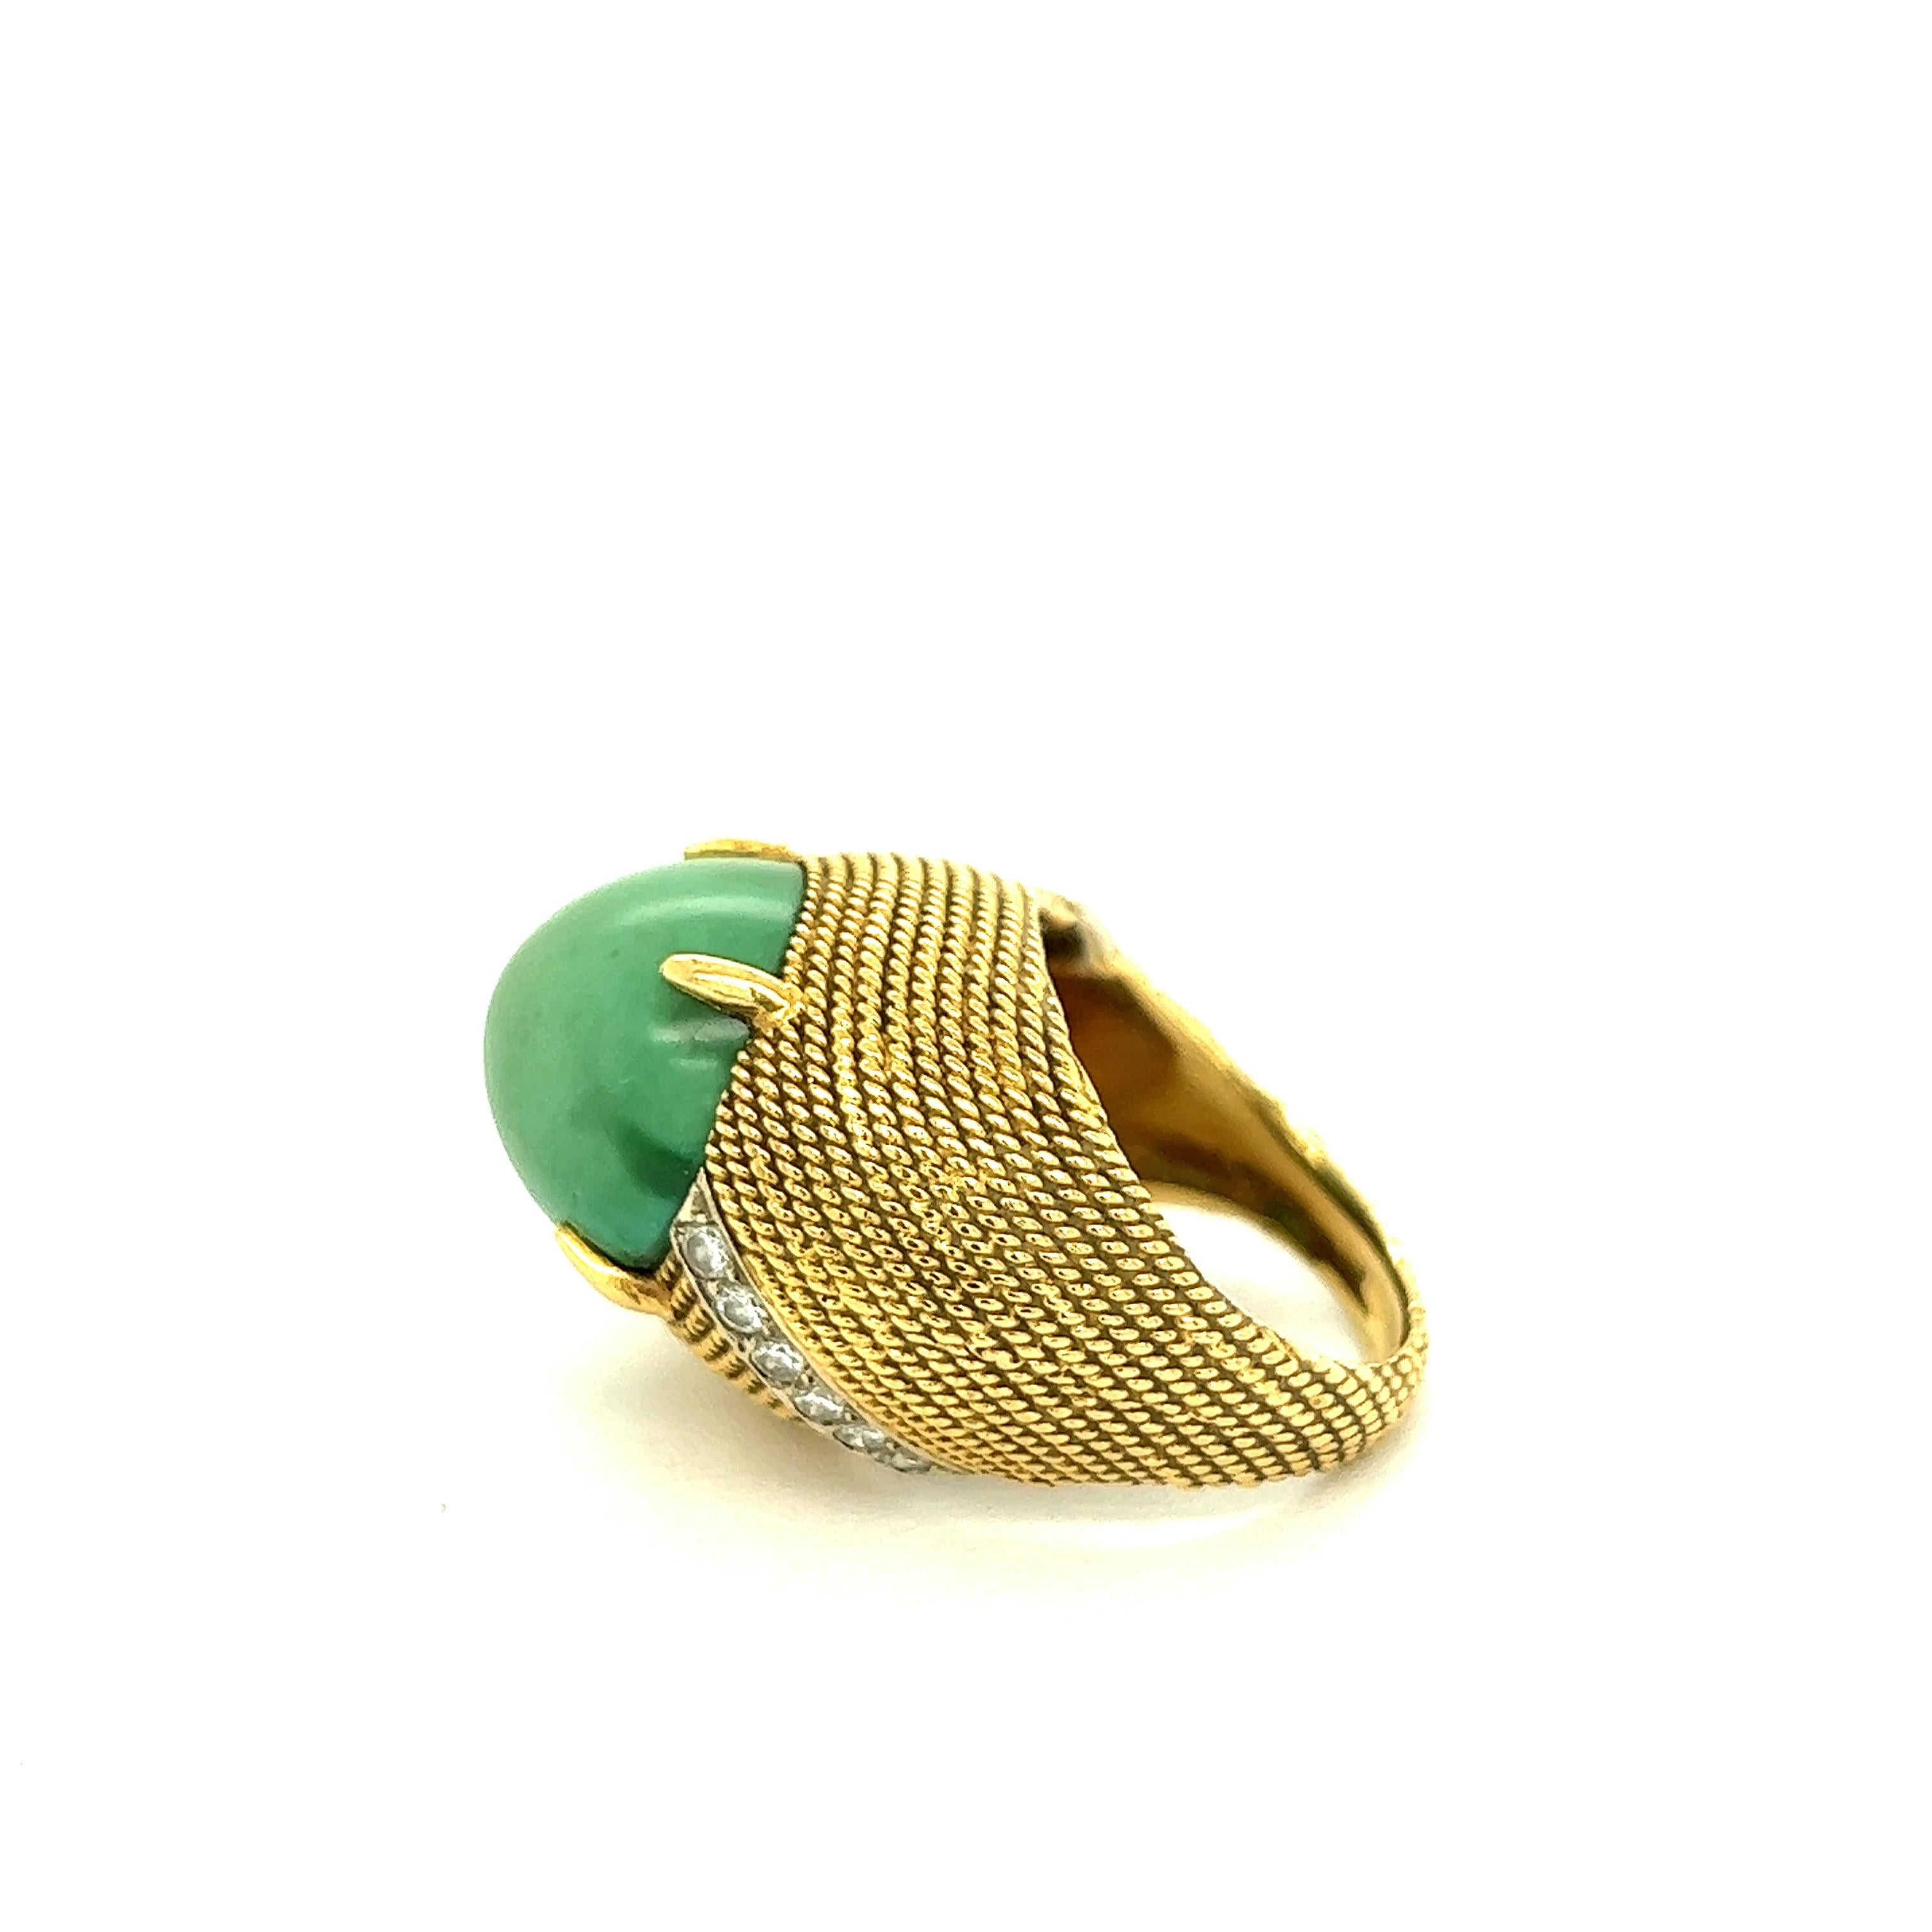 Cabochon Green Turquoise 18k Yellow Gold Cocktail Ring For Sale 3